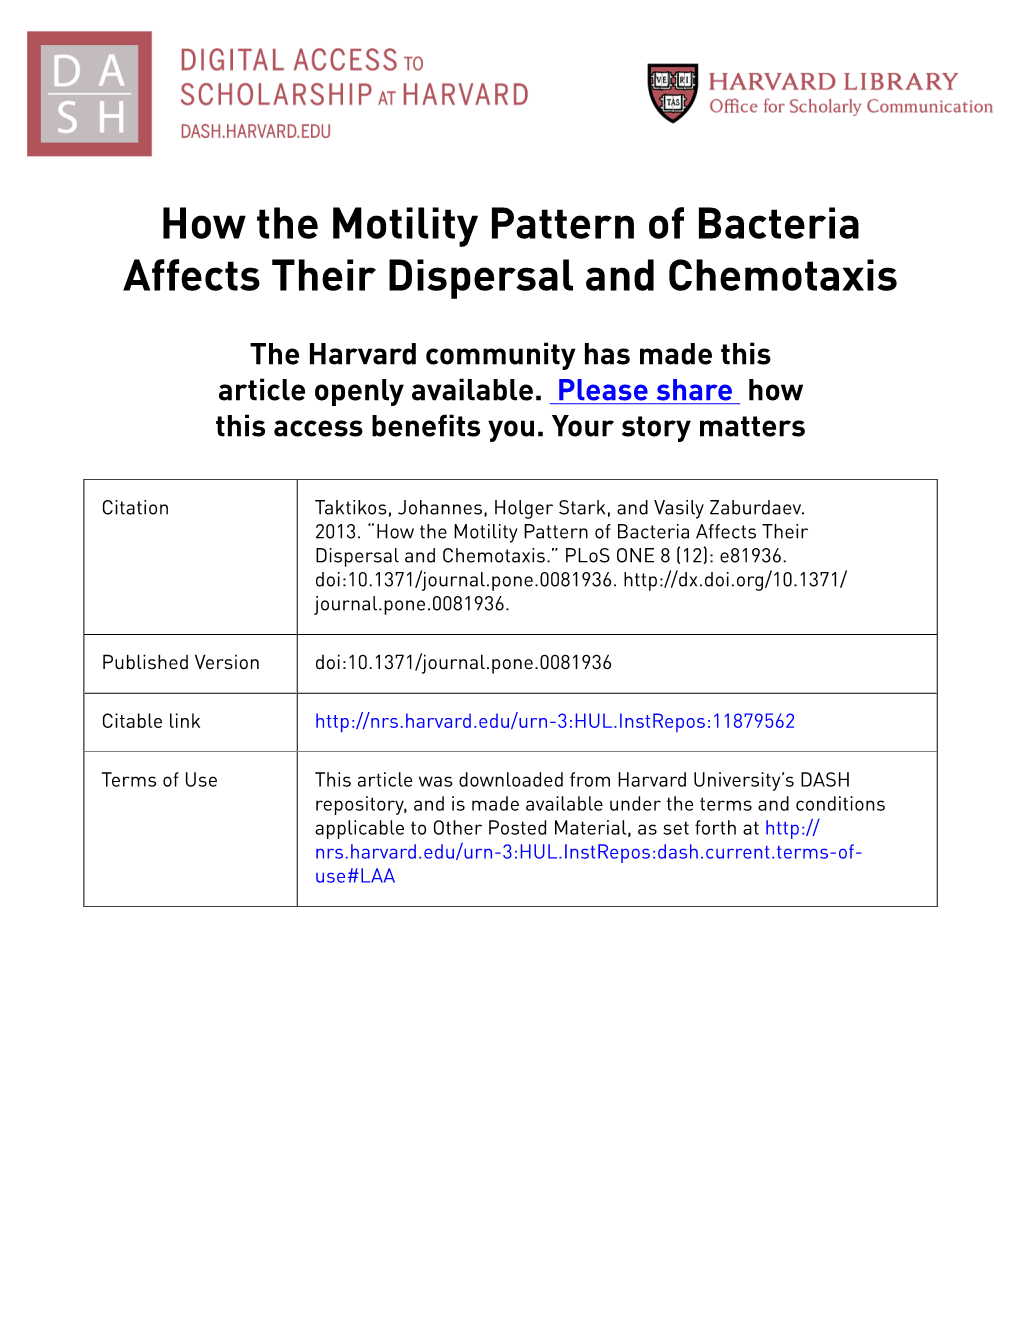 How the Motility Pattern of Bacteria Affects Their Dispersal and Chemotaxis